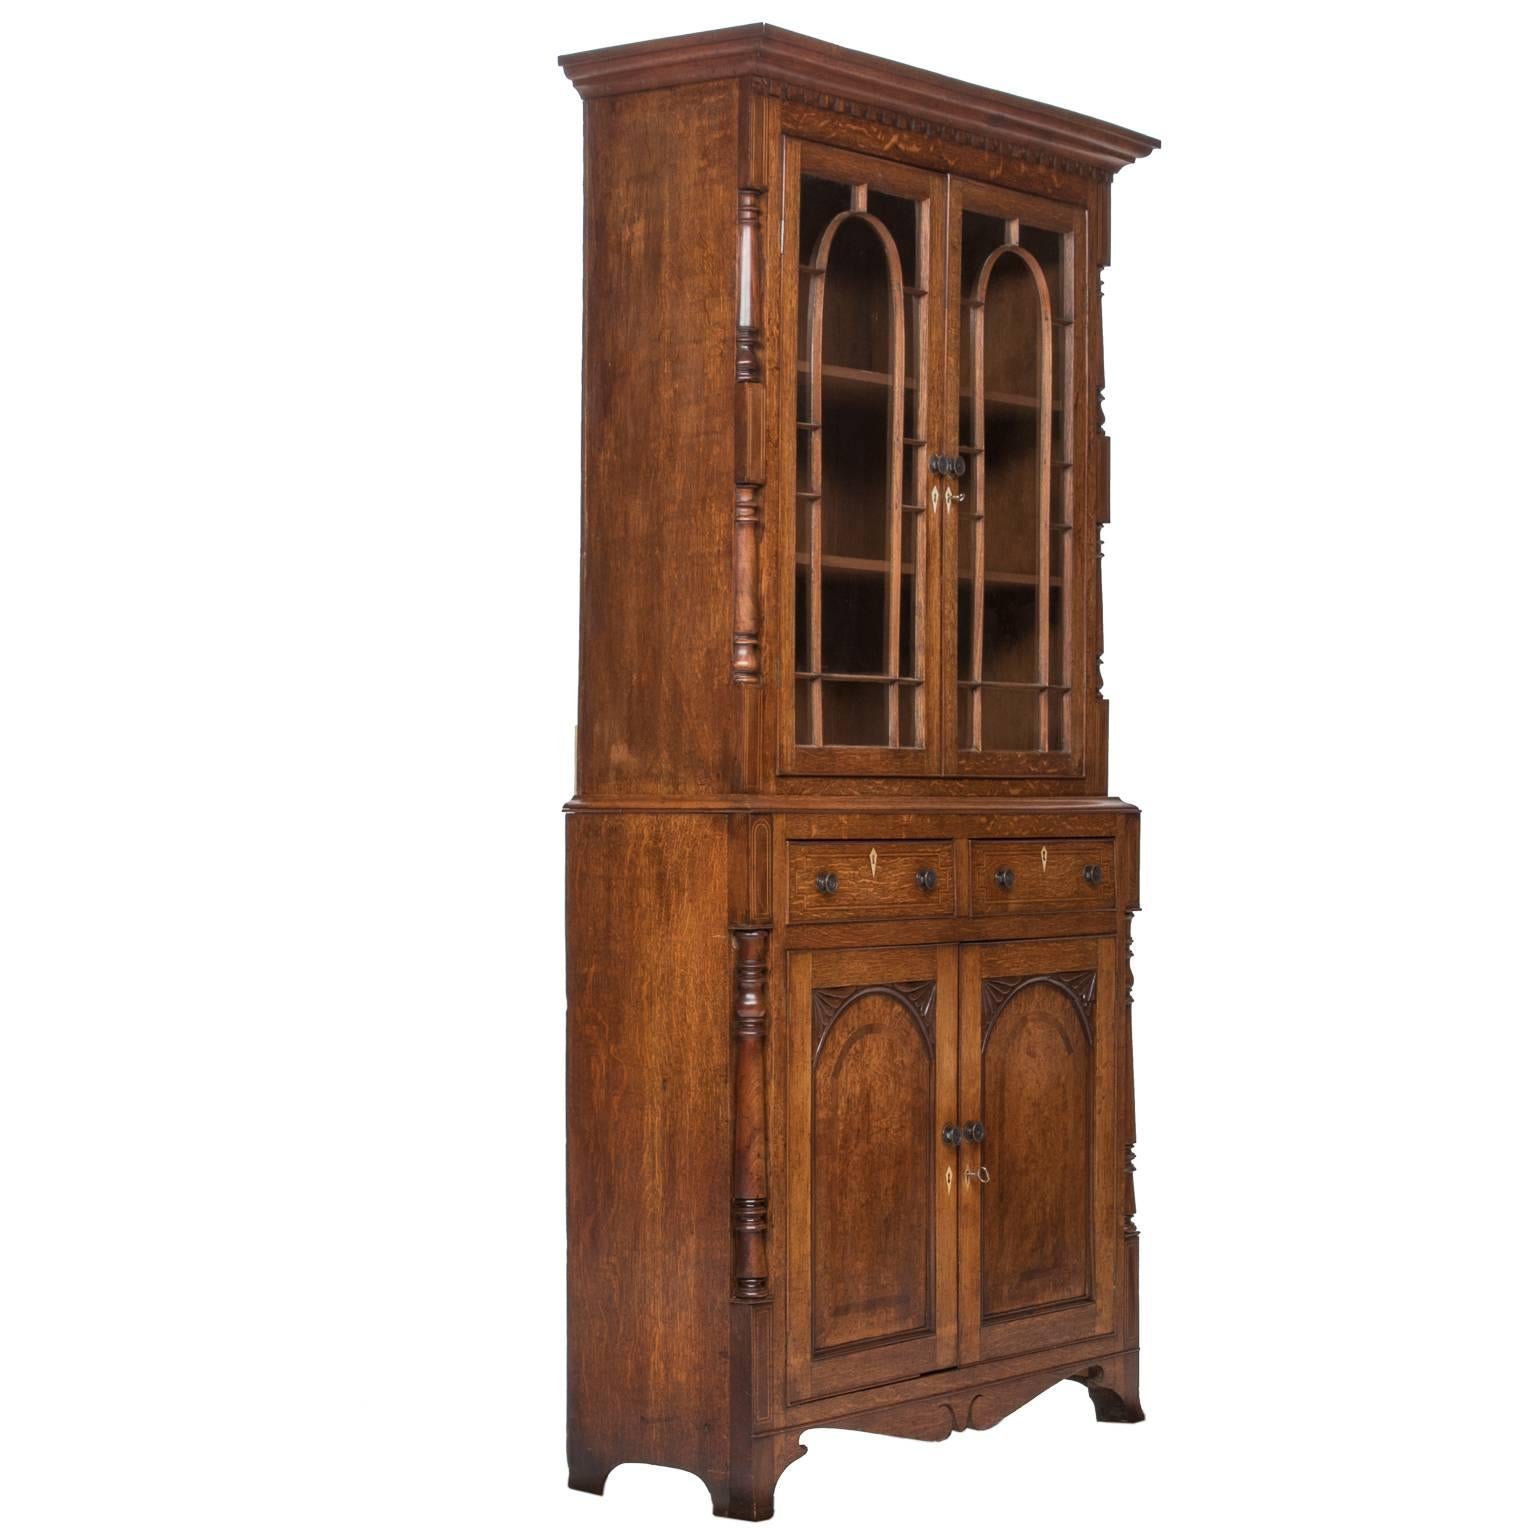 Lovely early 19th.c. North Welsh oak glazed cupboard c.1820. Two doors glazed top with two shelves over a cupboard base with two drawers in the waist. Lots of good detail here with a flared cornice with dental carving, astragal glazed doors, inlaid